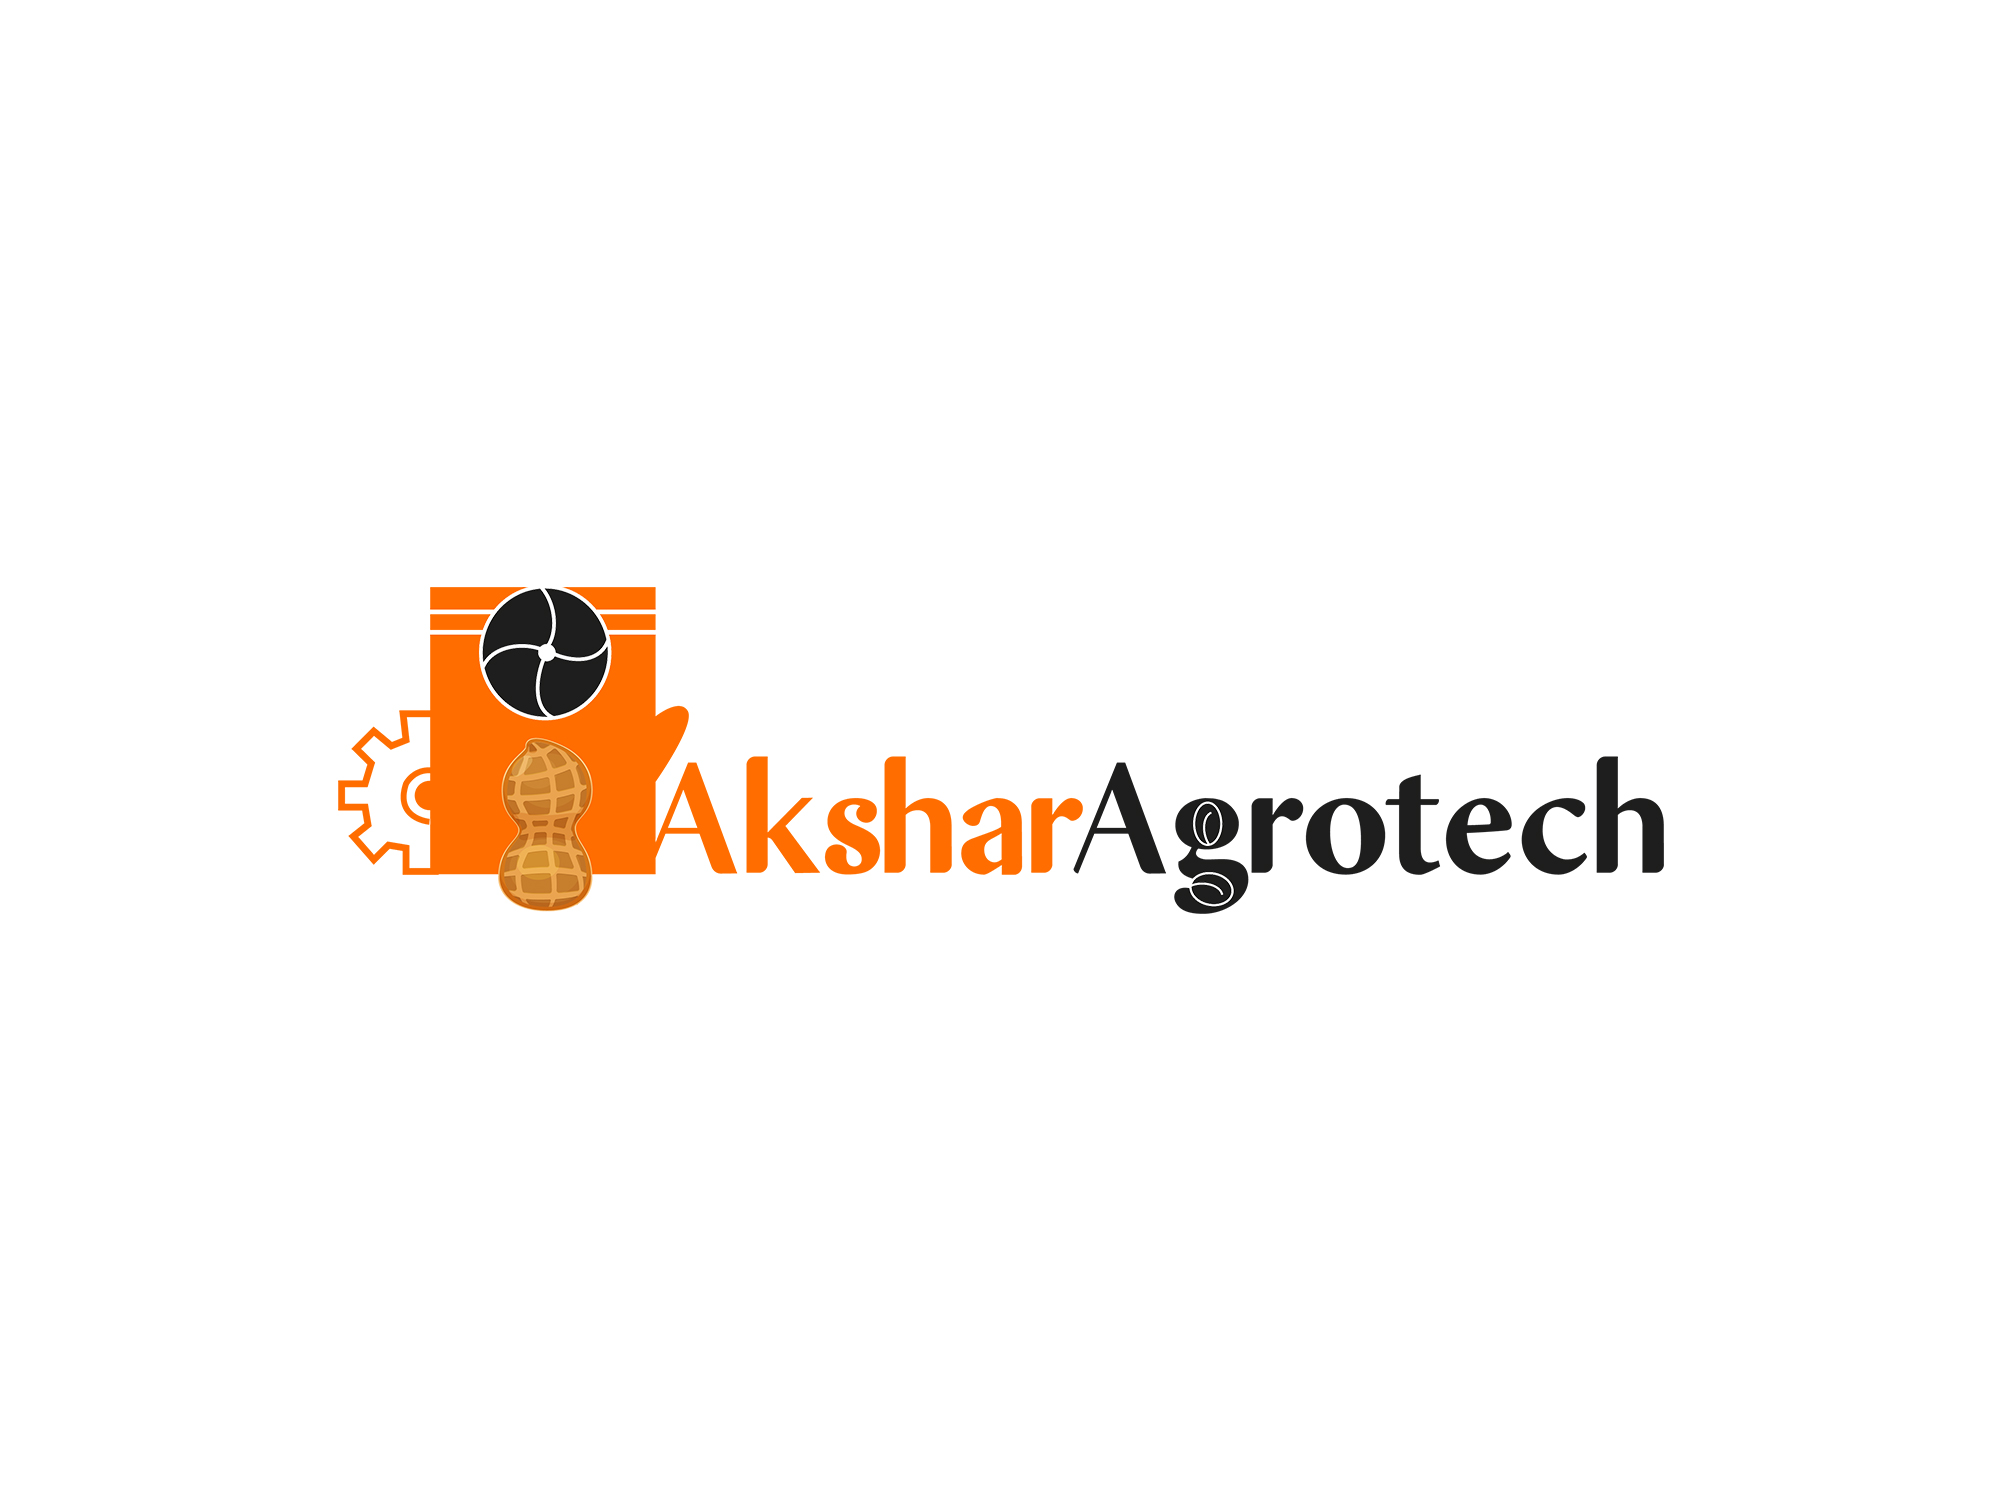 Akshar Agrotech- XpertLab Technologies Private Limited